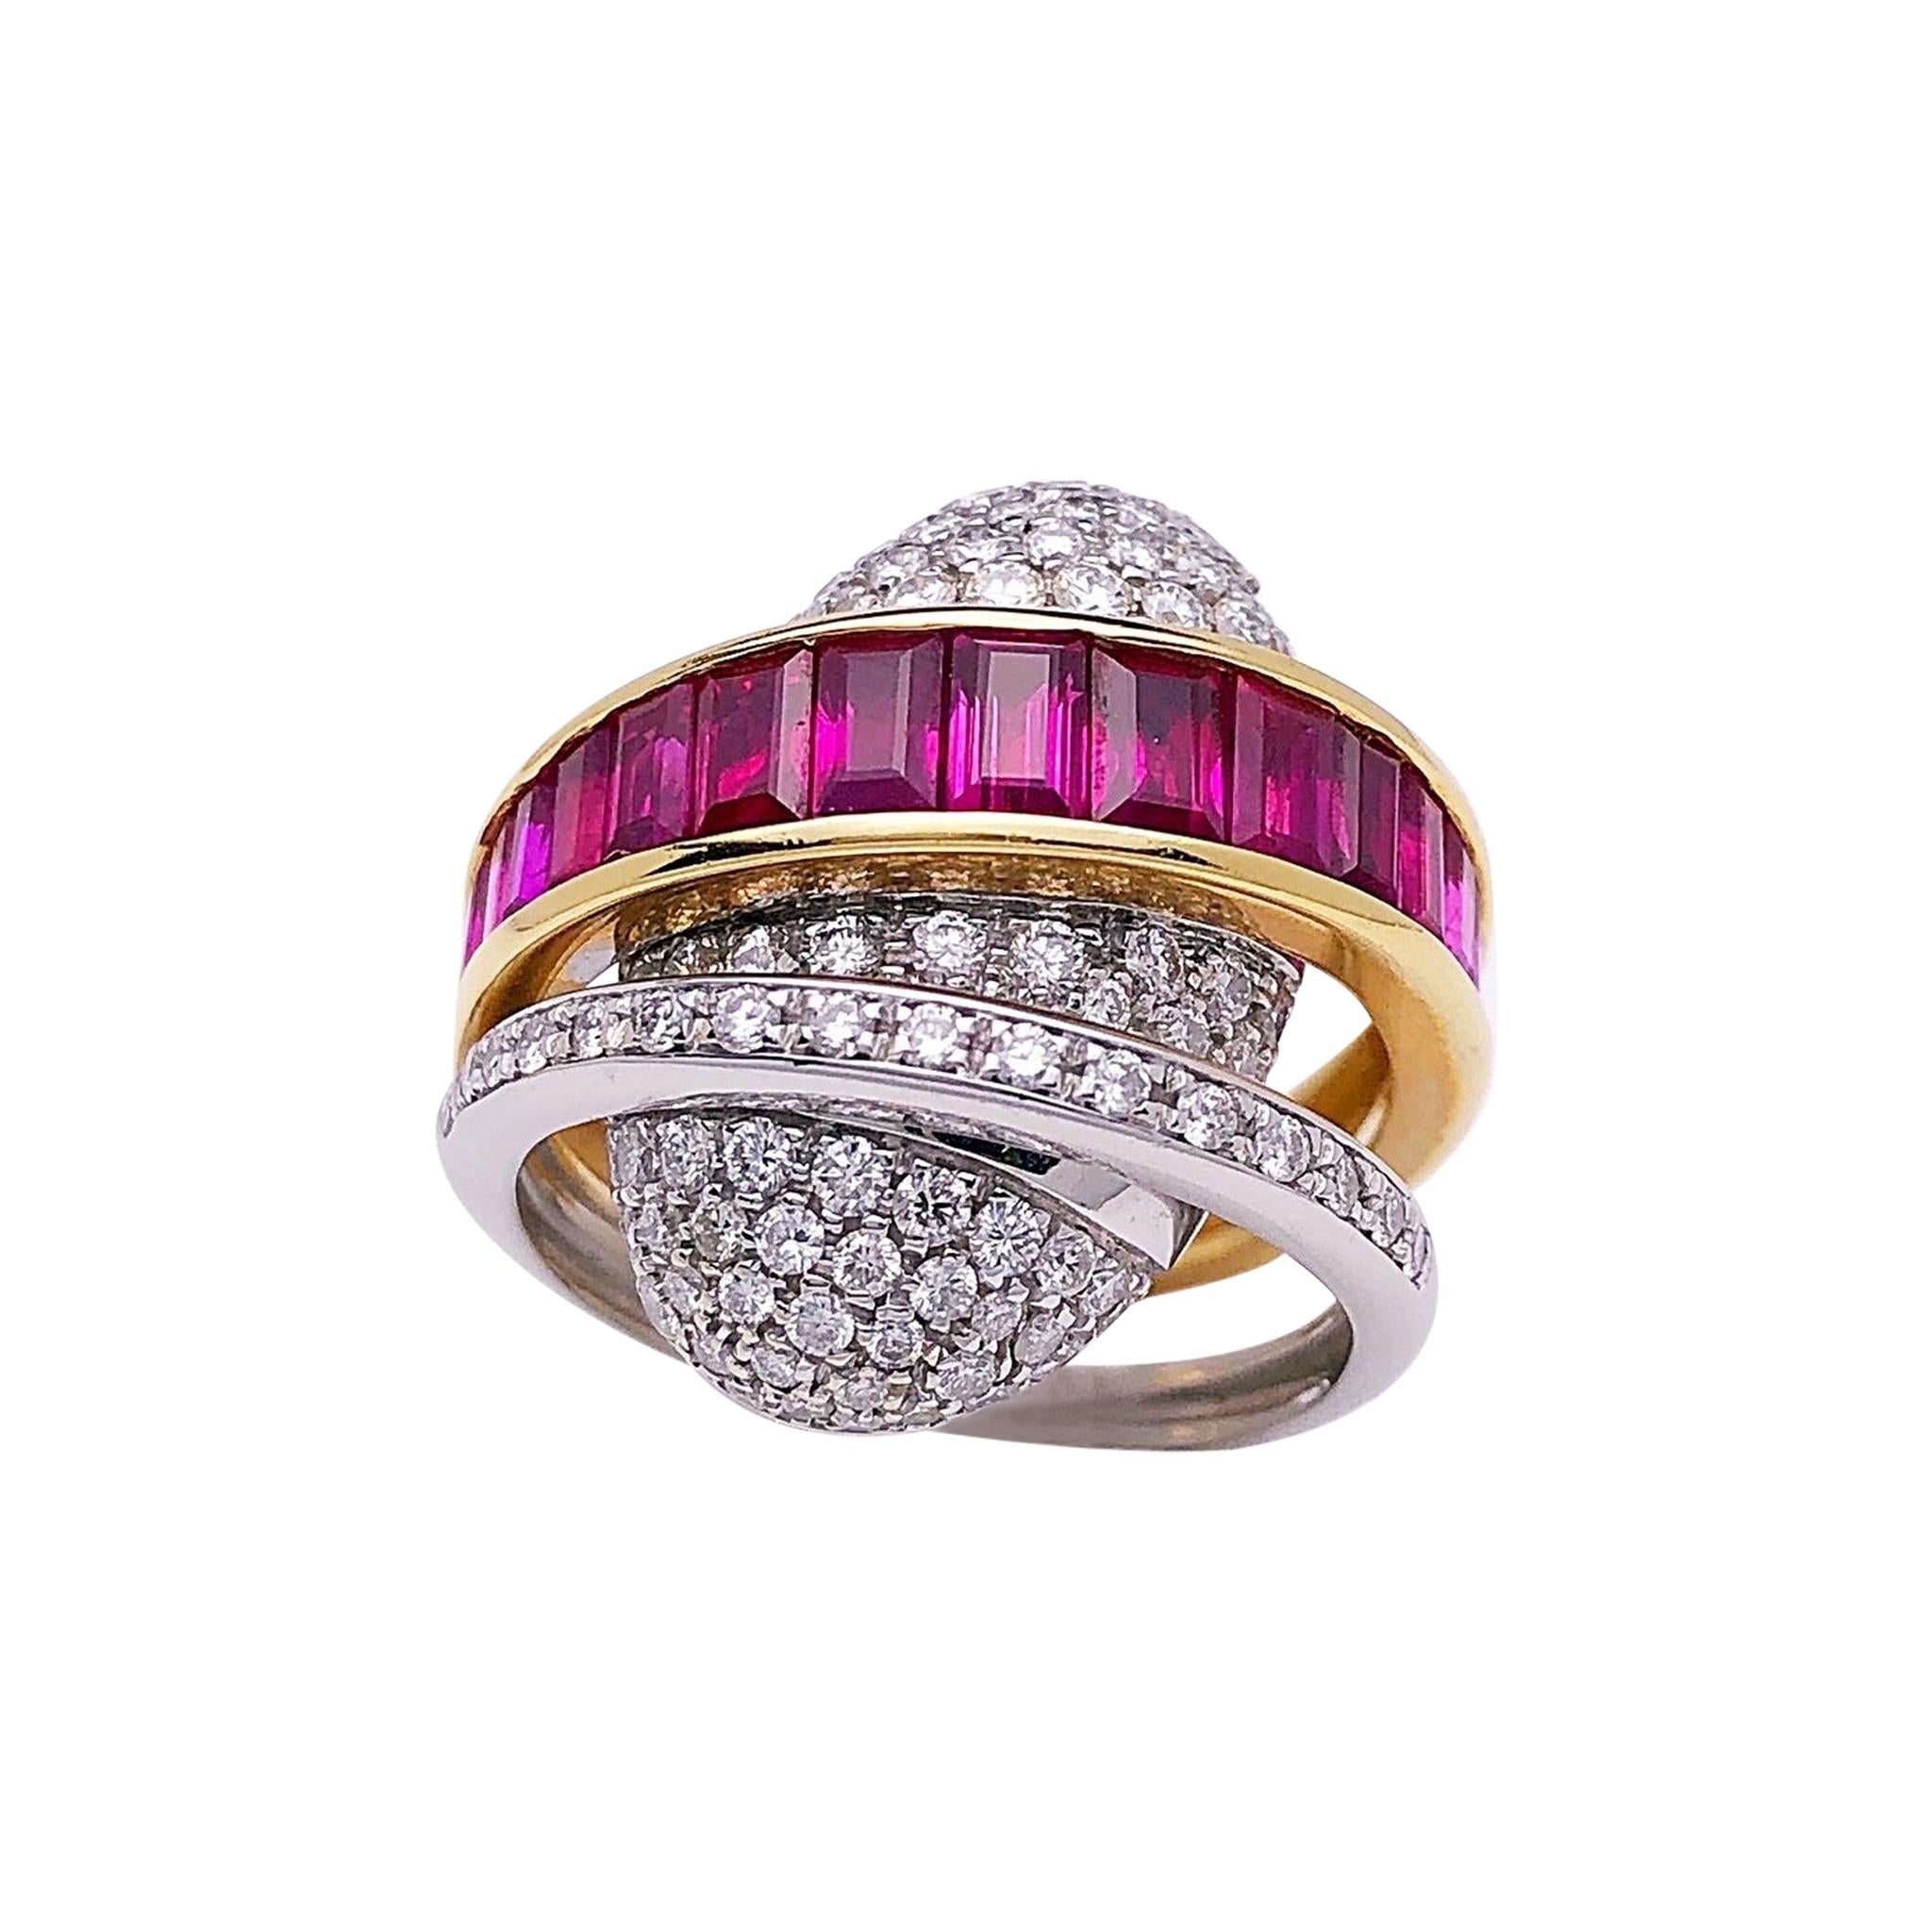 Alfieri & St. John 18KT. Yellow & White Gold Ring with 3.95Ct. Rubies & Diamonds For Sale